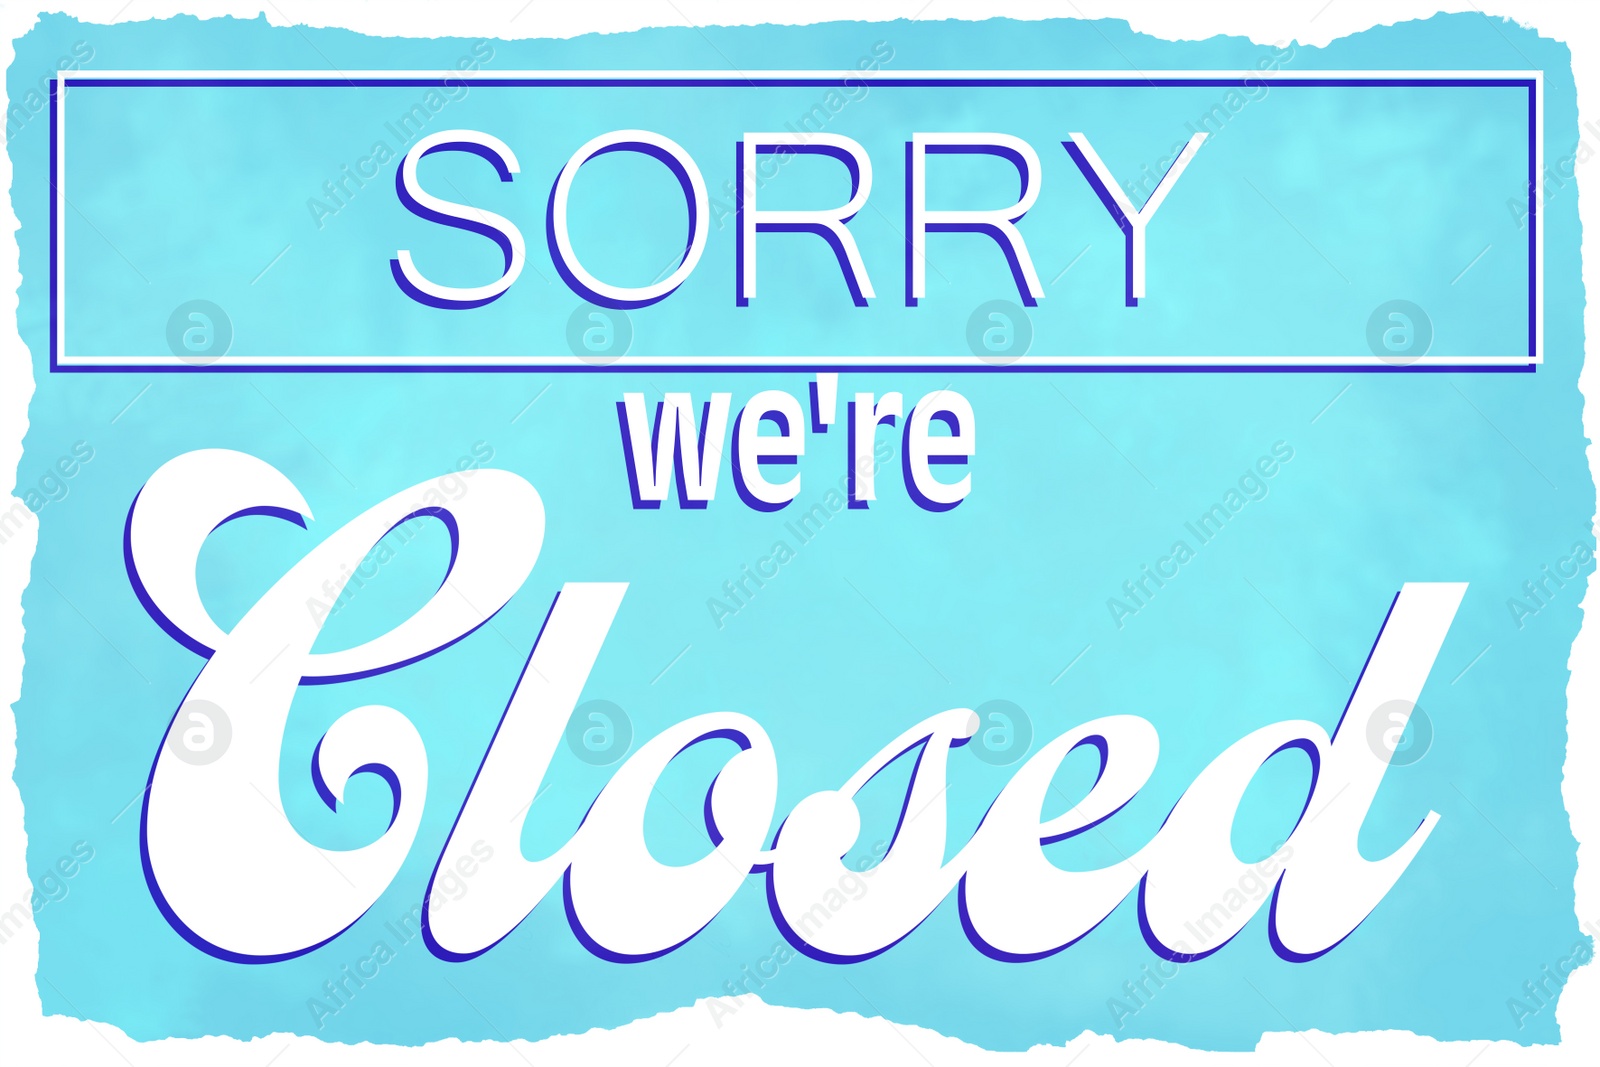 Illustration of Text Sorry we're CLOSED on turquoise background, illustration. Information sign 